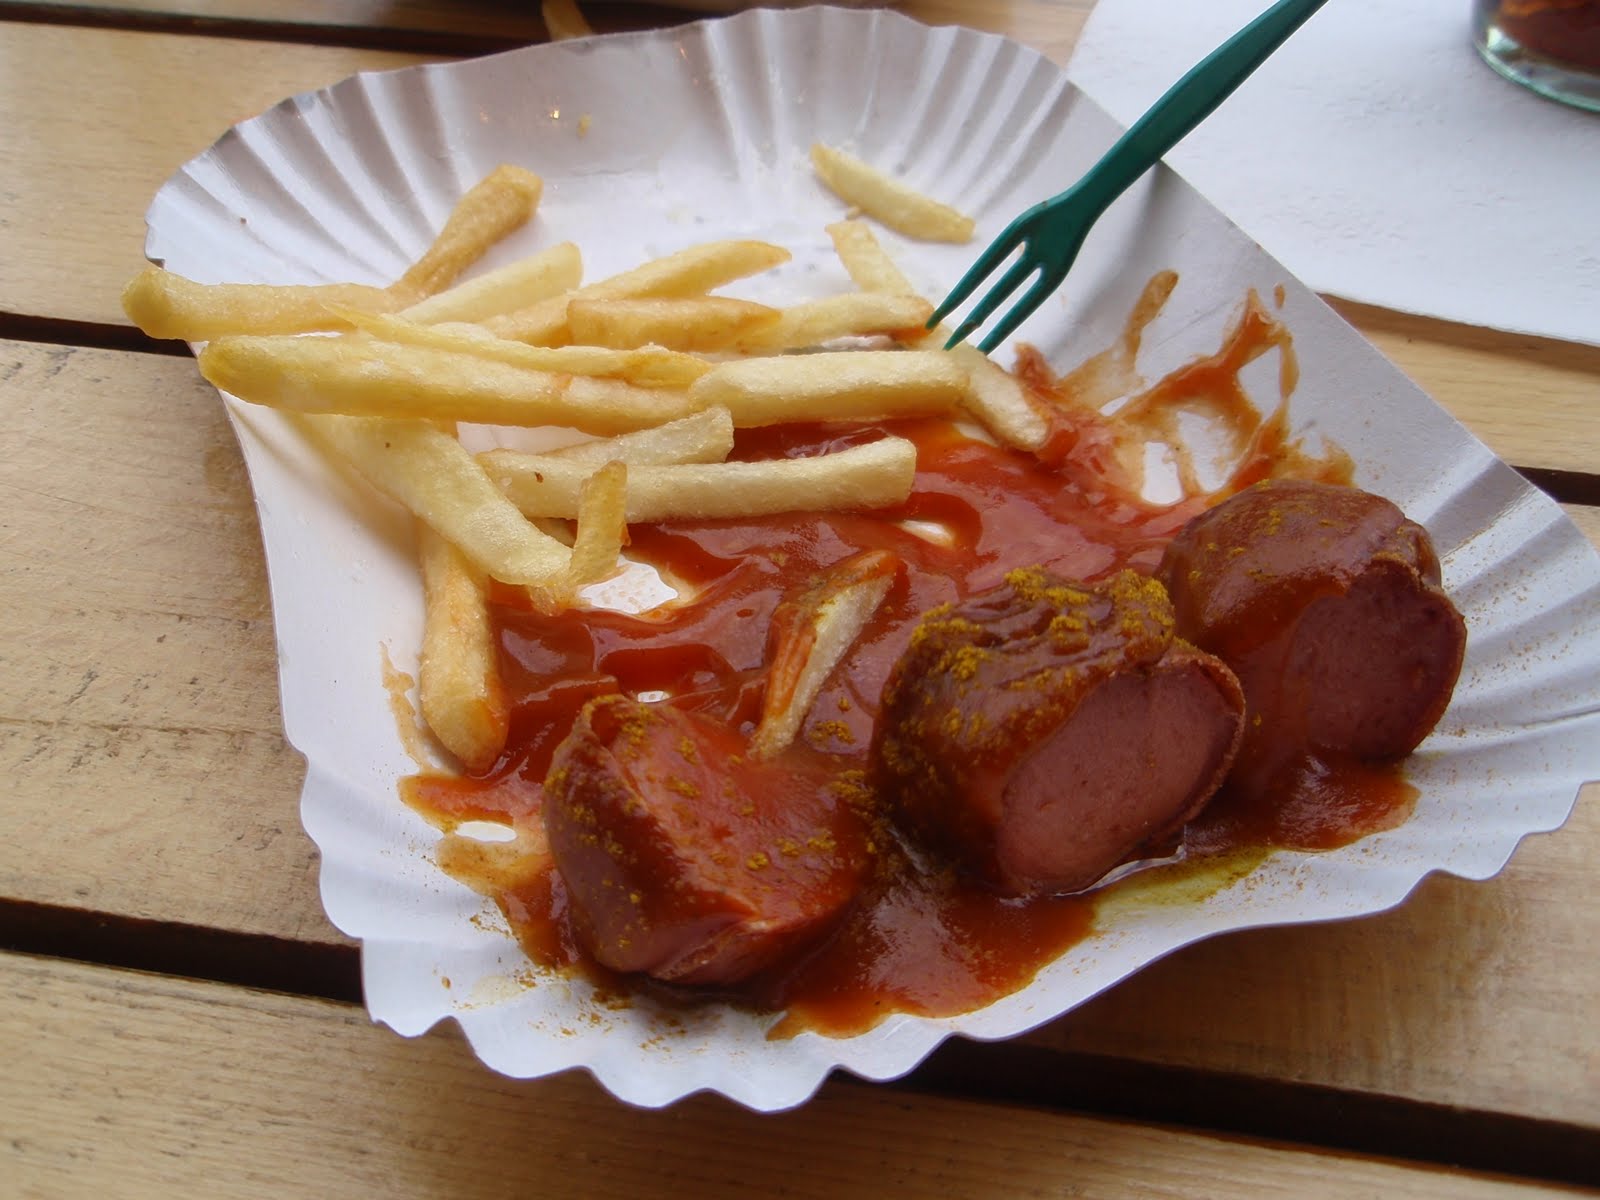 The Globe on my Plate: Currywurst! Spysnack or a hot dog with ketchup?